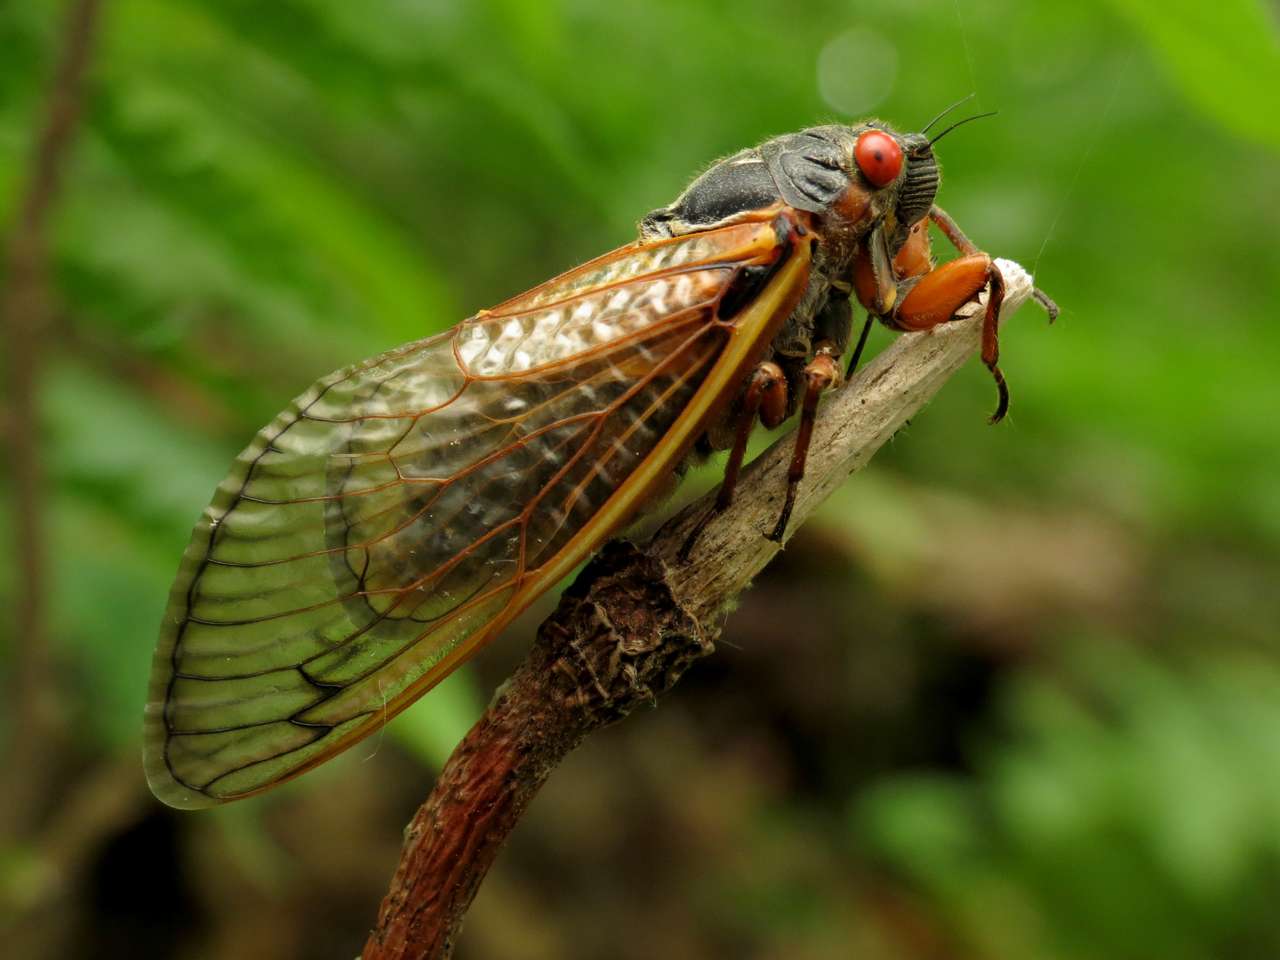 Cicada Puzzle puzzle online from photo